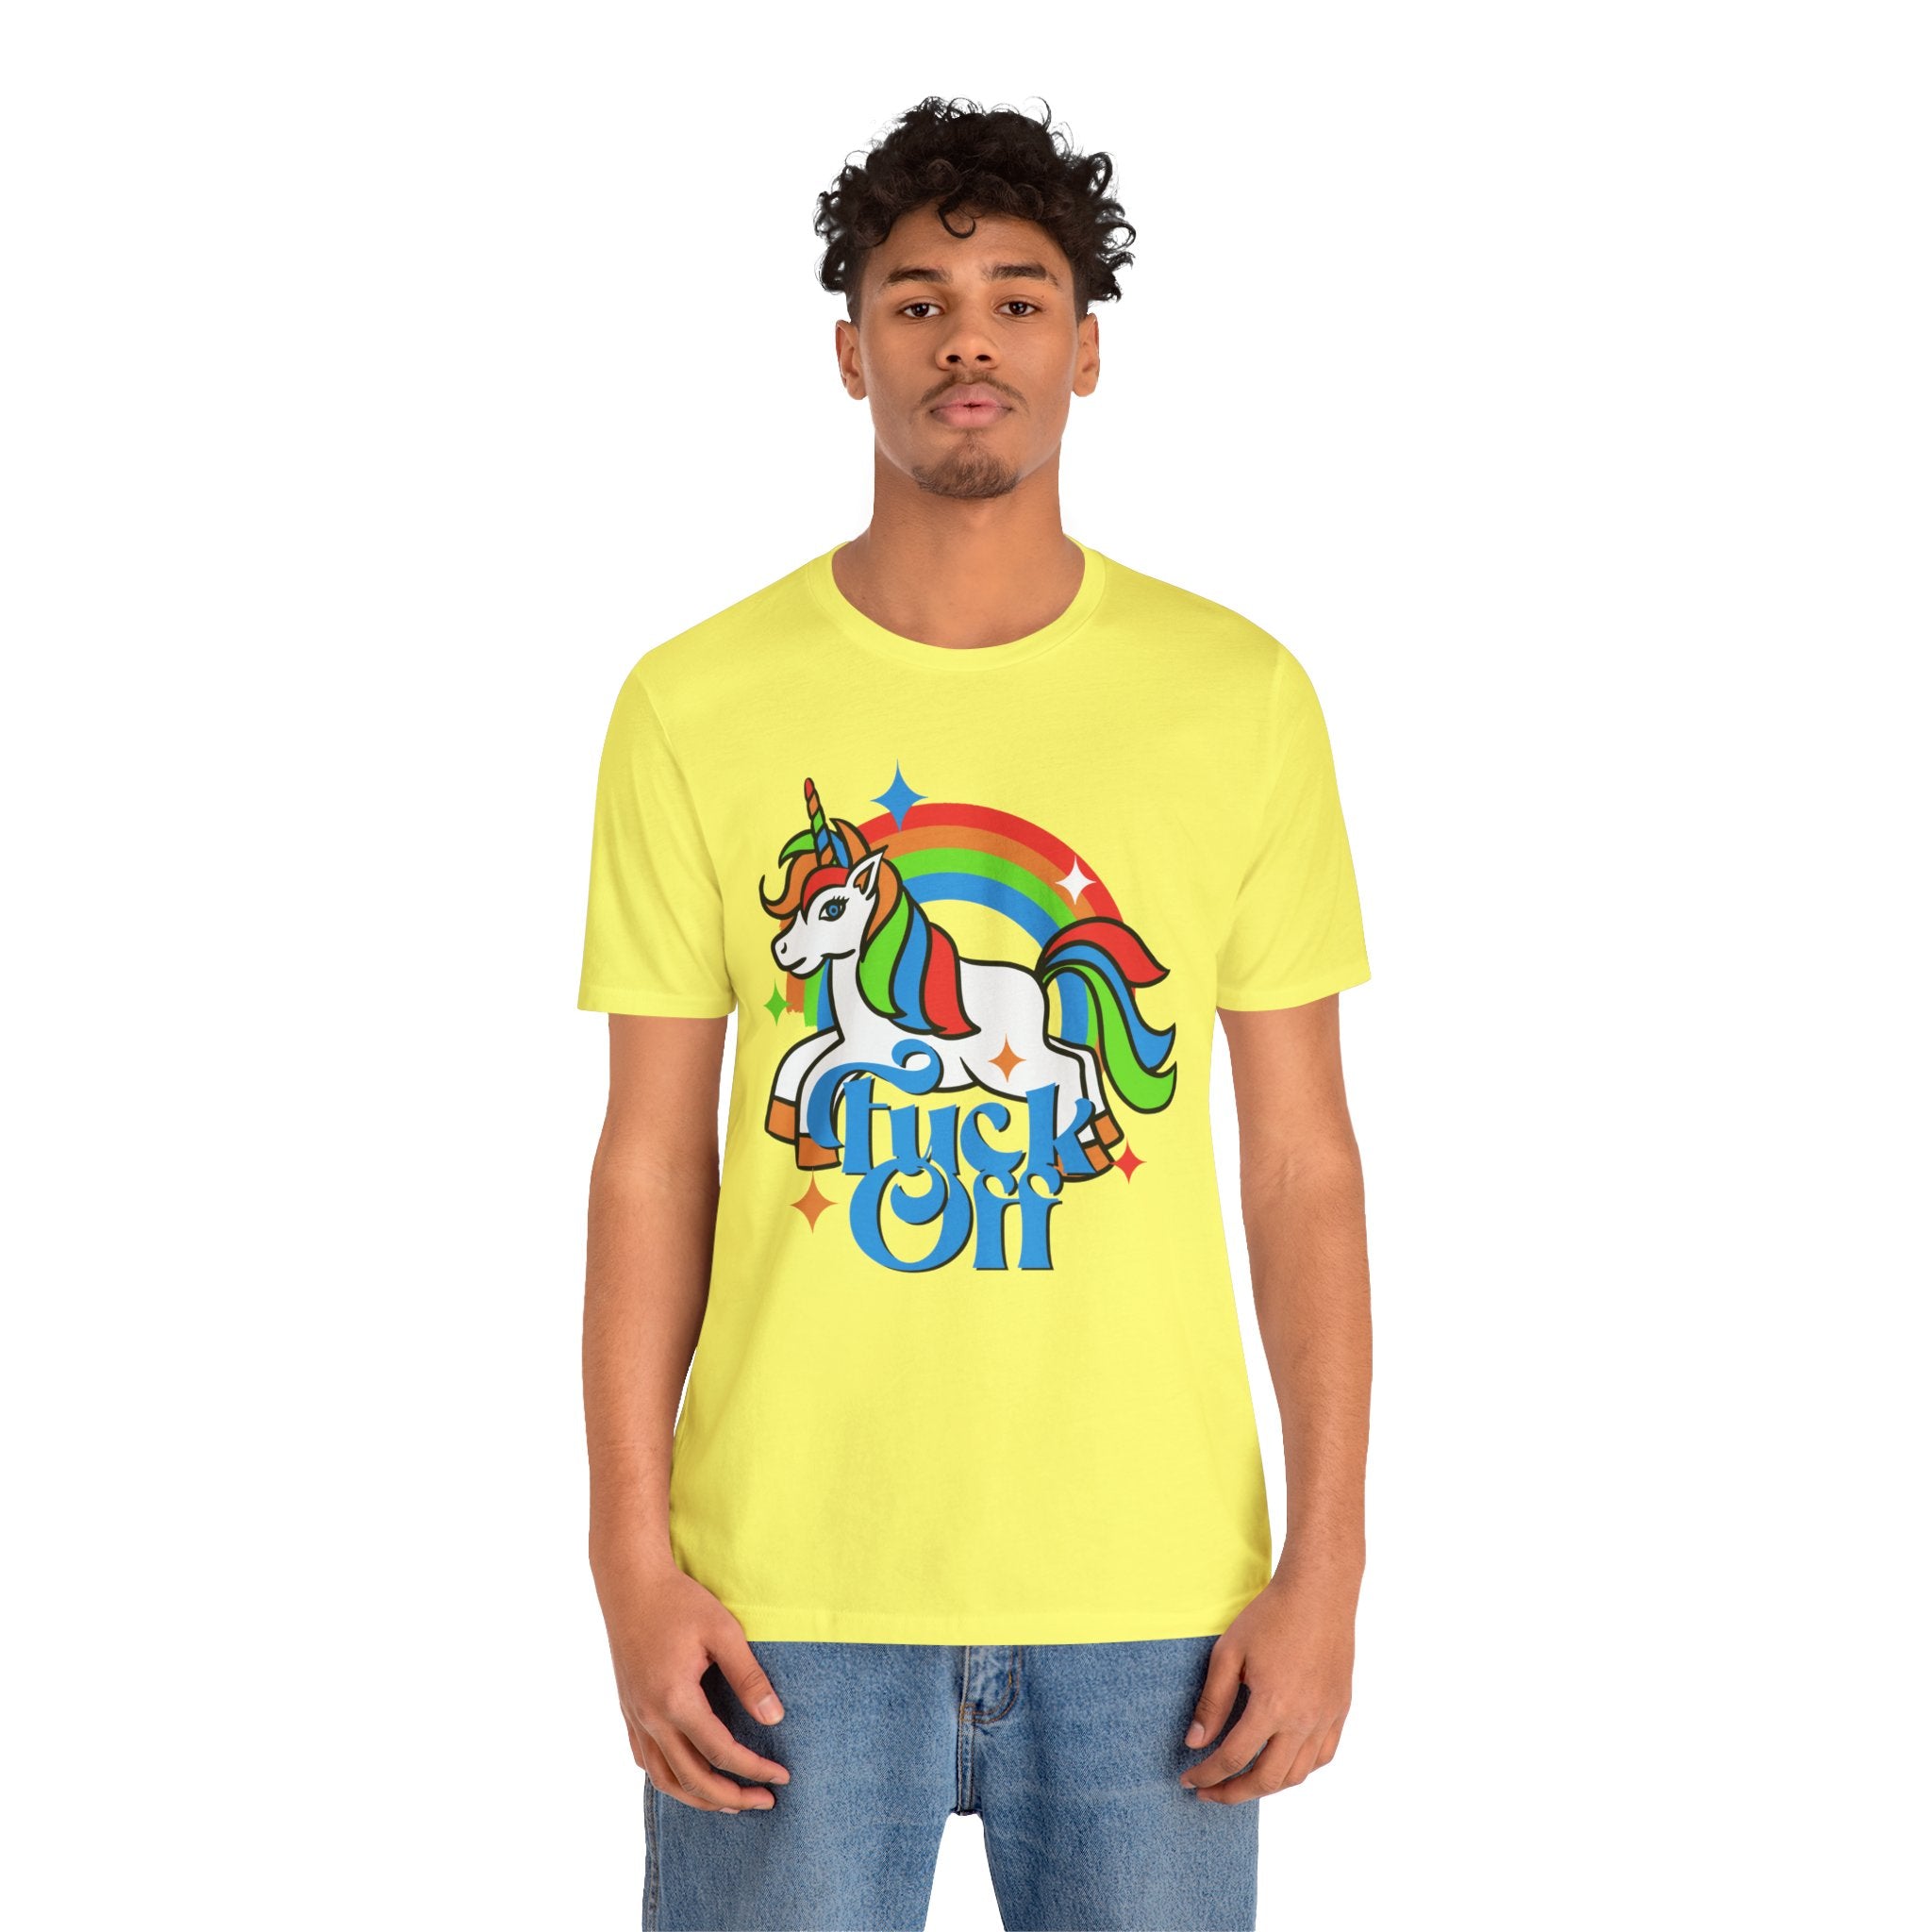 Young man wearing a bright yellow unisex F off T-Shirt with a unicorn and rainbow graphic and the phrase "f*ck off" printed in quality print on it.